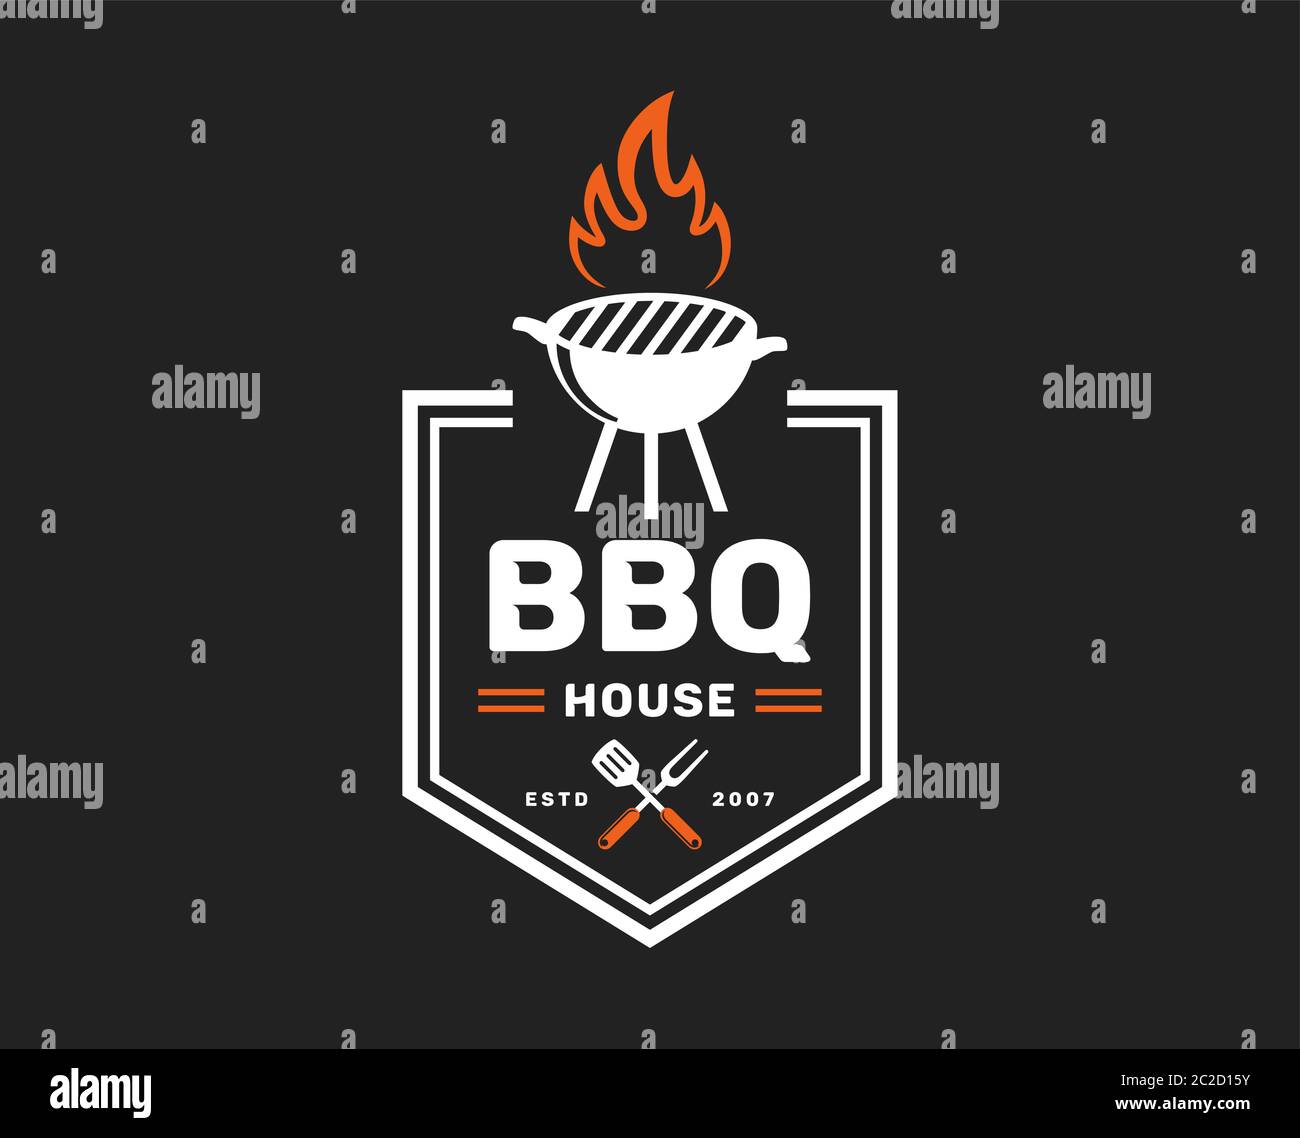 BBQ house logo isolated on black background. Vector badge for barbecue restaurant. Retro emblem with grill. Stock Vector